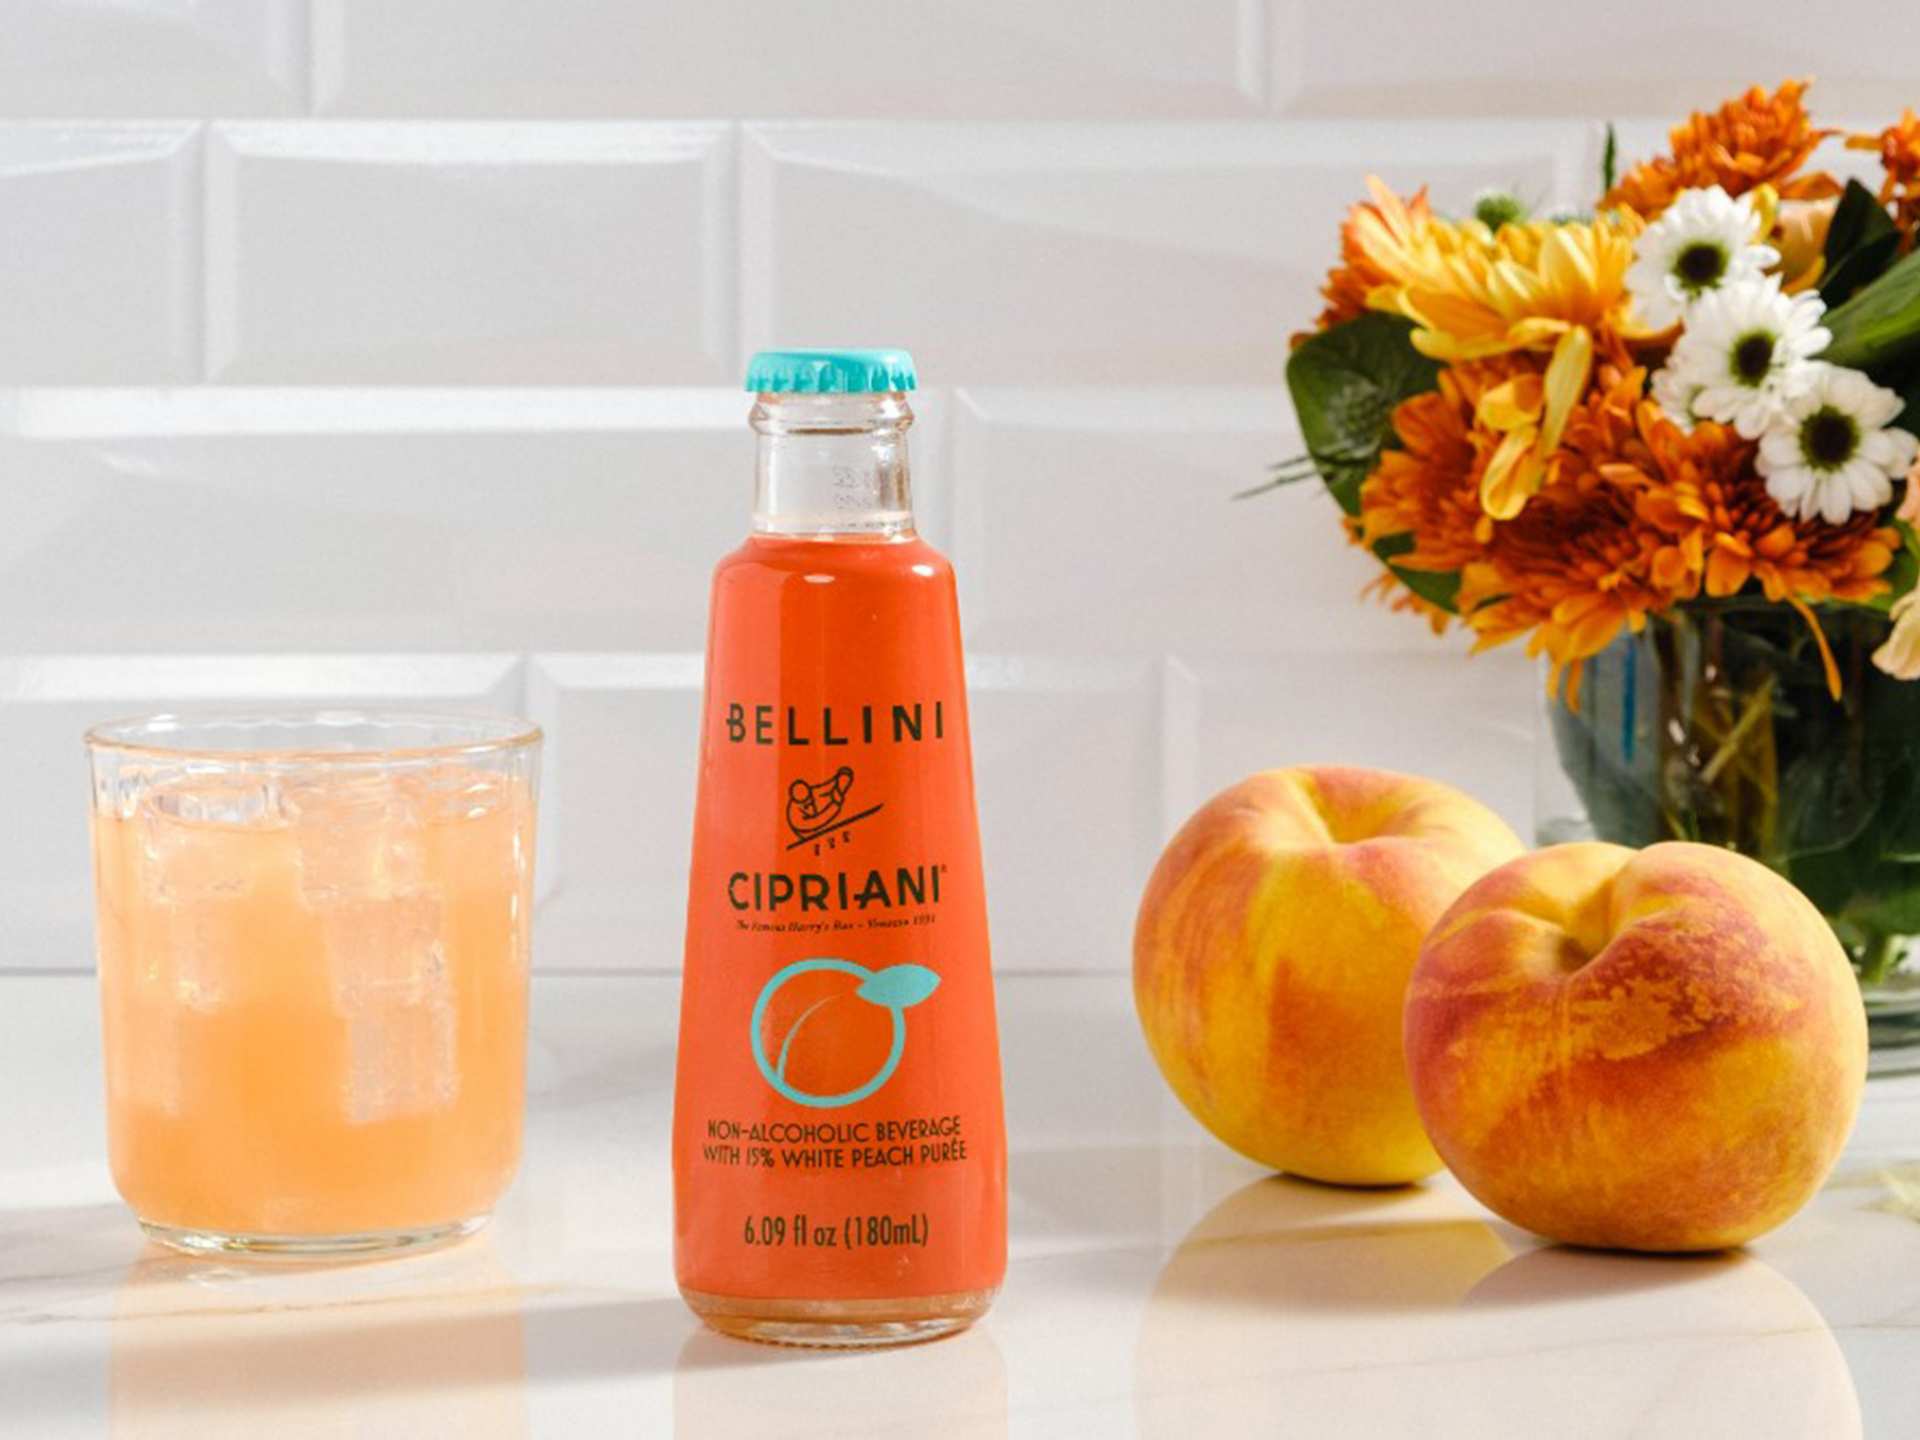 Non-alcoholic wine and non-alcoholic beer | Alcohol-free Bellini Cipriani bottle